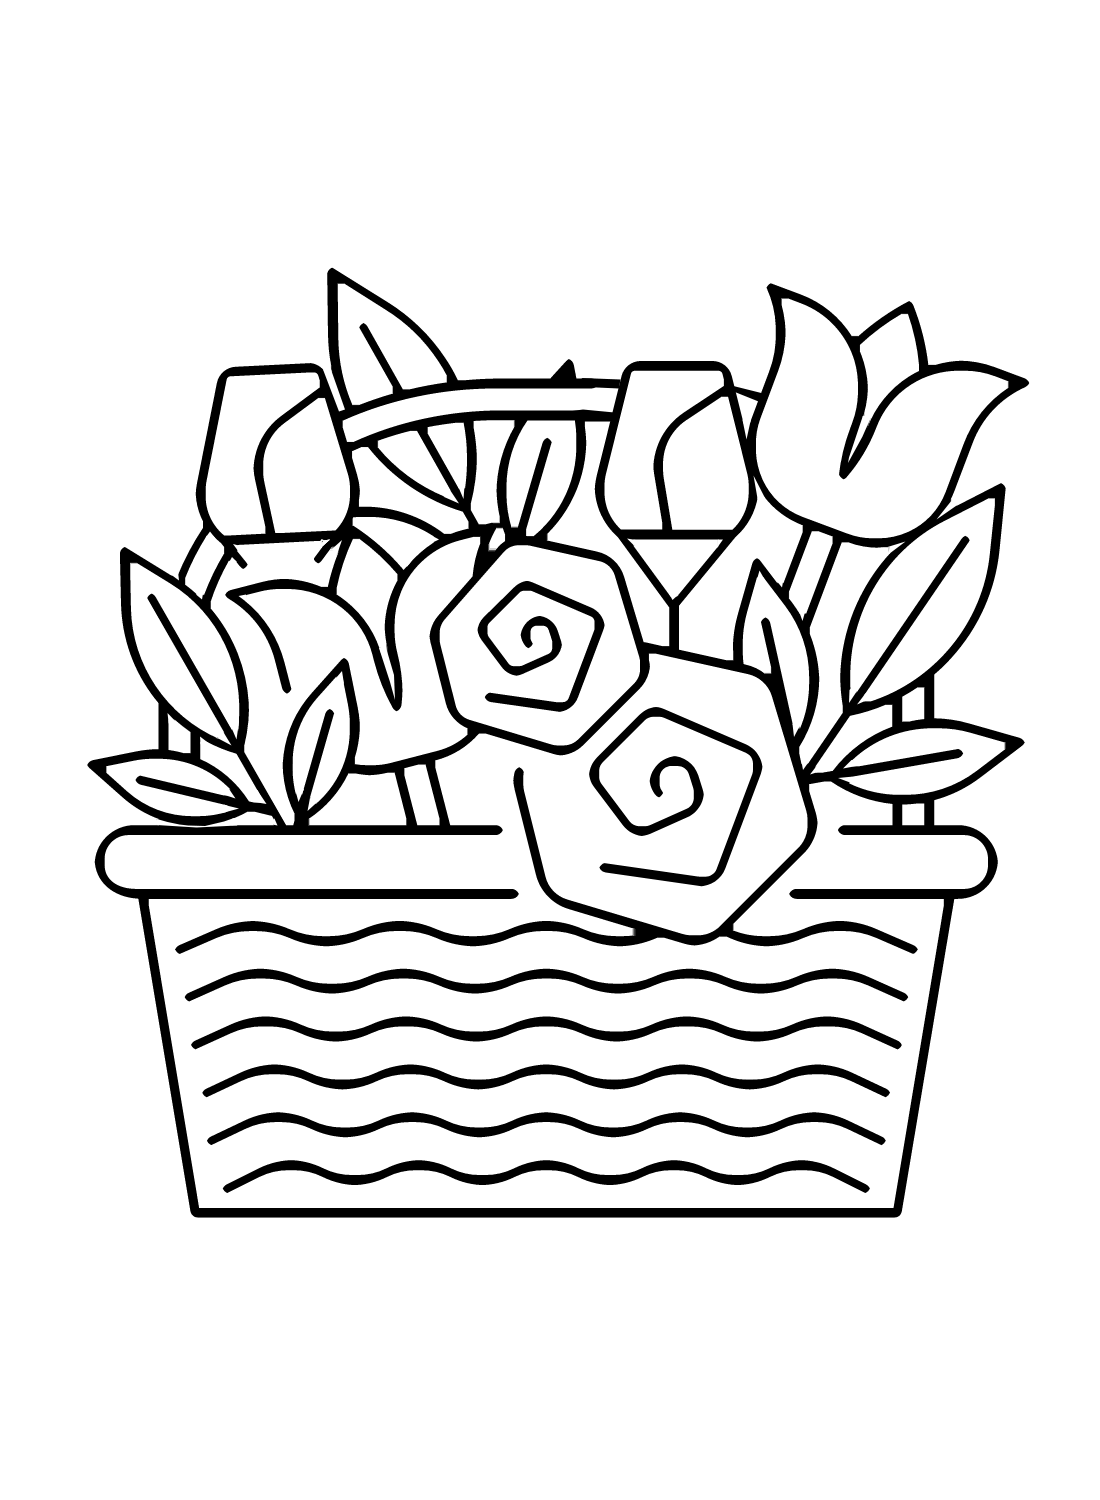 Flowers Basket Simple Coloring Page